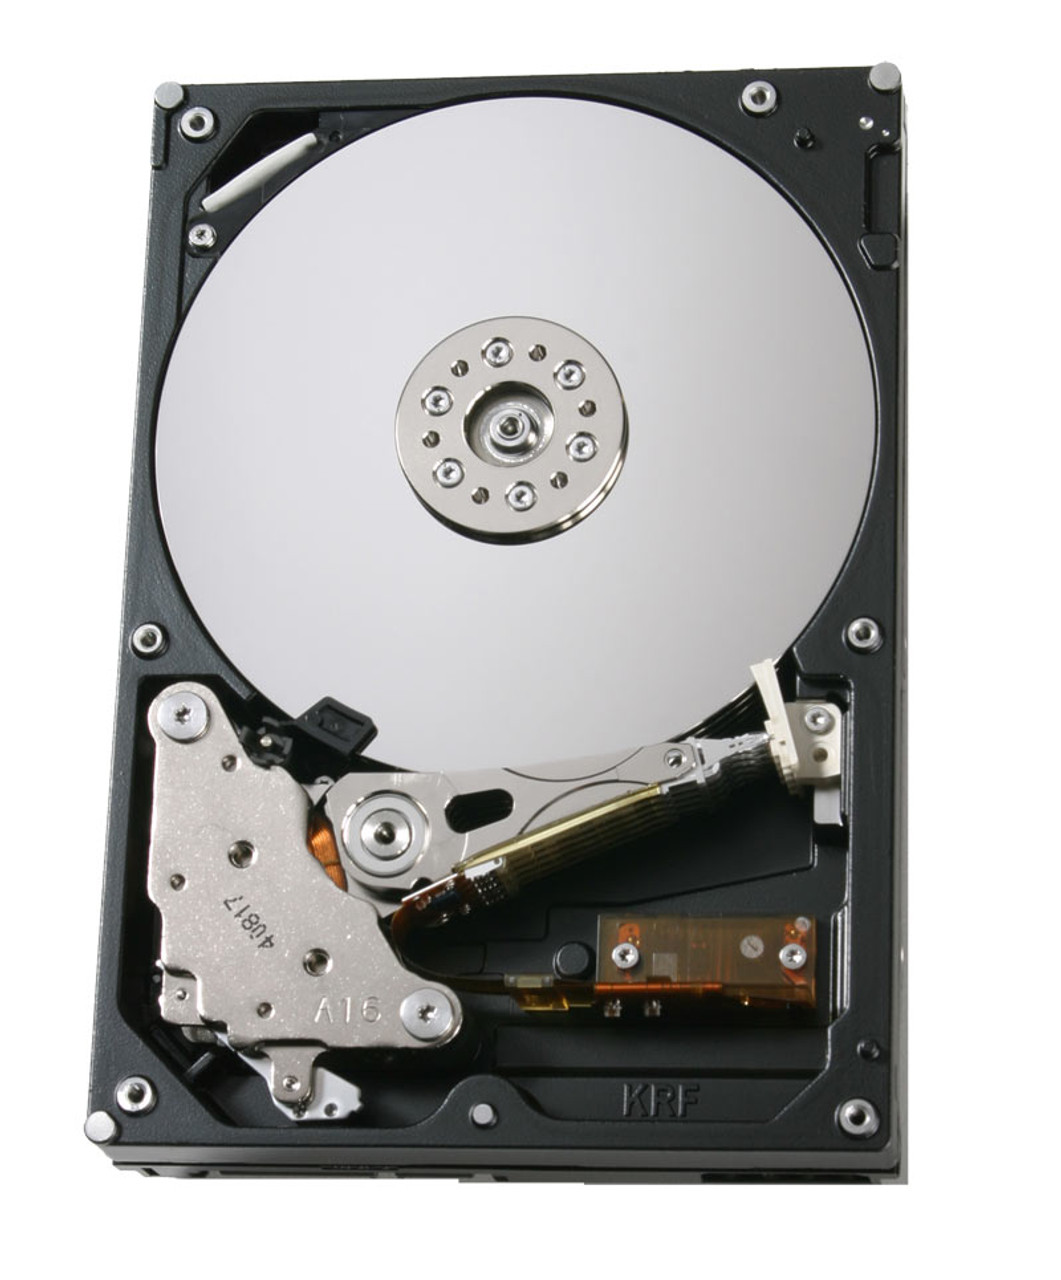 【パーツ】3.5 SATA 3TB 1台 正常 Hitachi HDS723030ALA640 使用時間71185H ■HDD1485